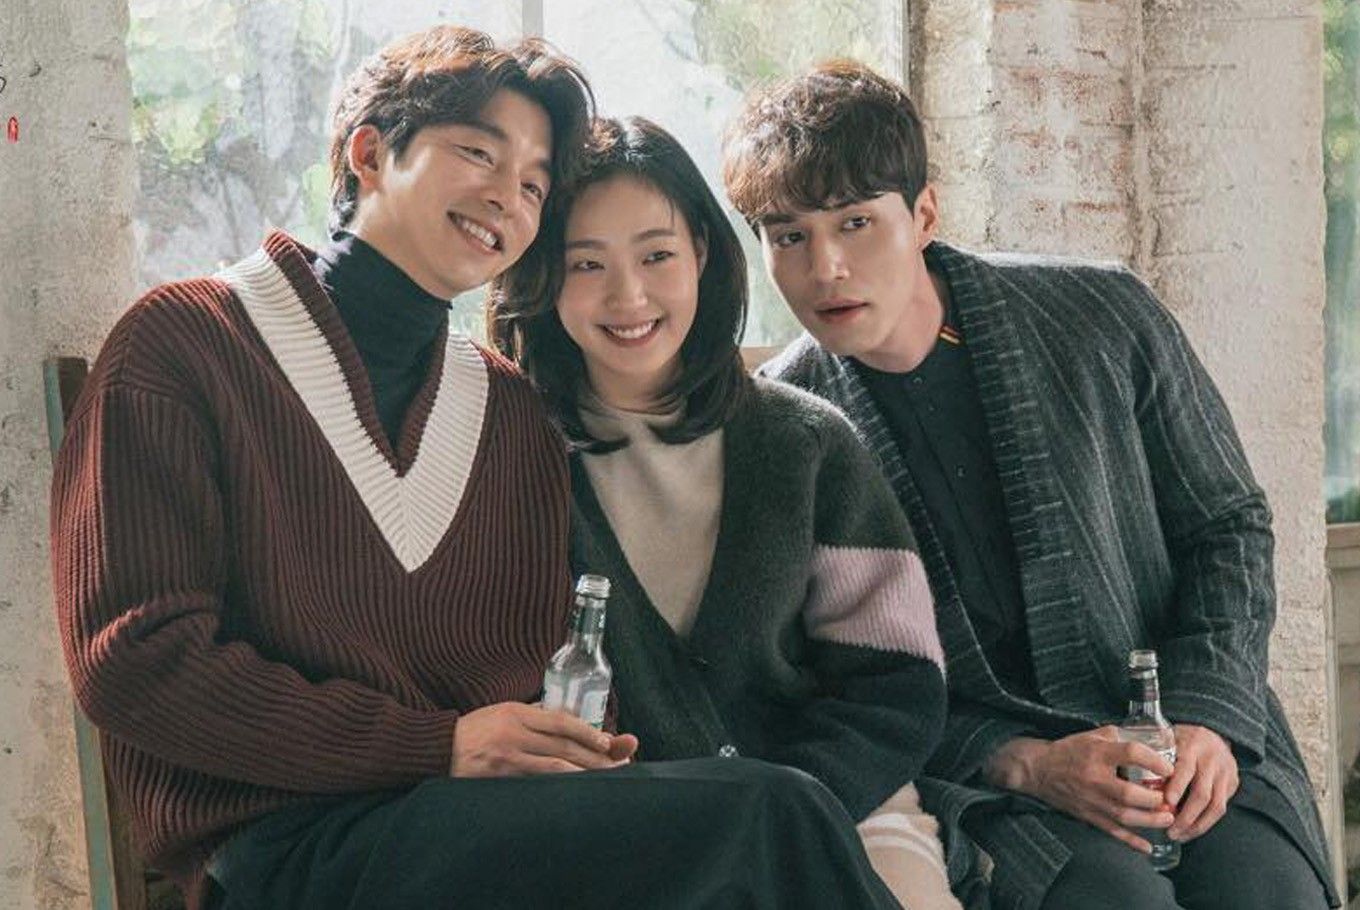 Romantic K Drama Shows On Netflix To Binge Watch: CLOY, Start Up, And More